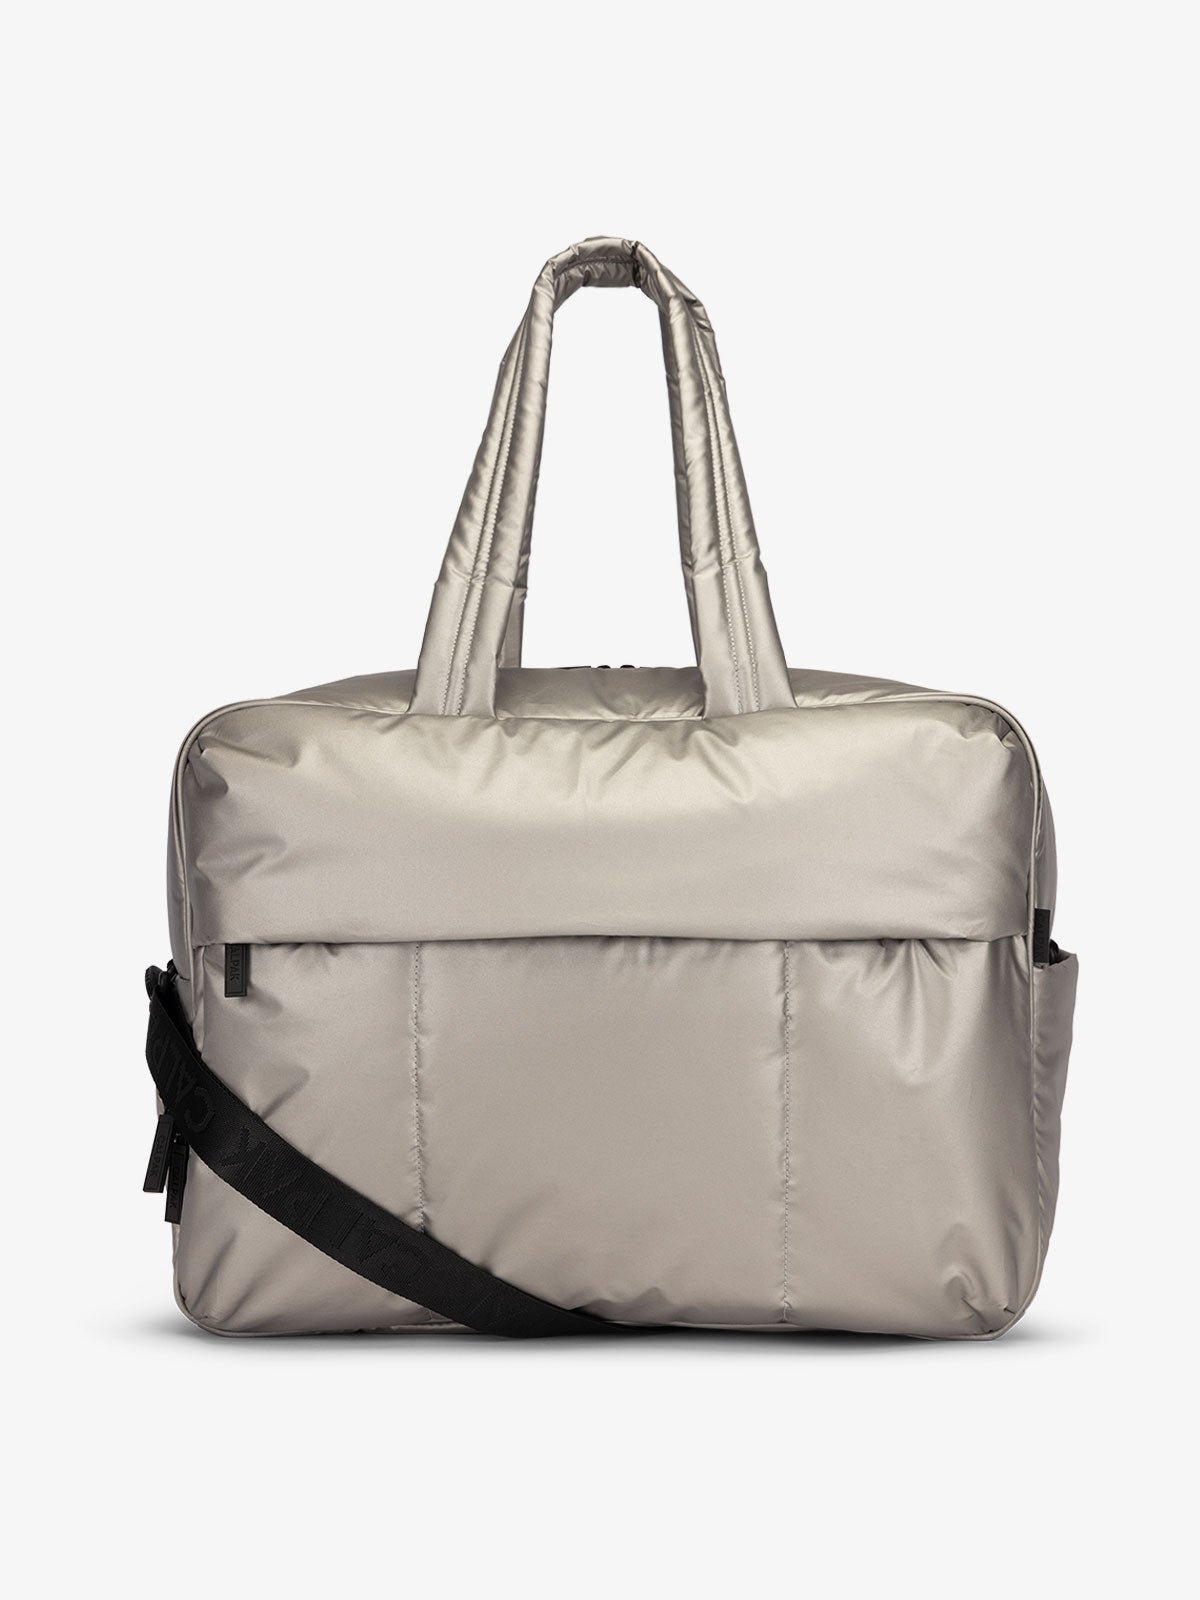 CALPAK Luka large duffle bag with detachable strap and zippered front pocket in metallic silver